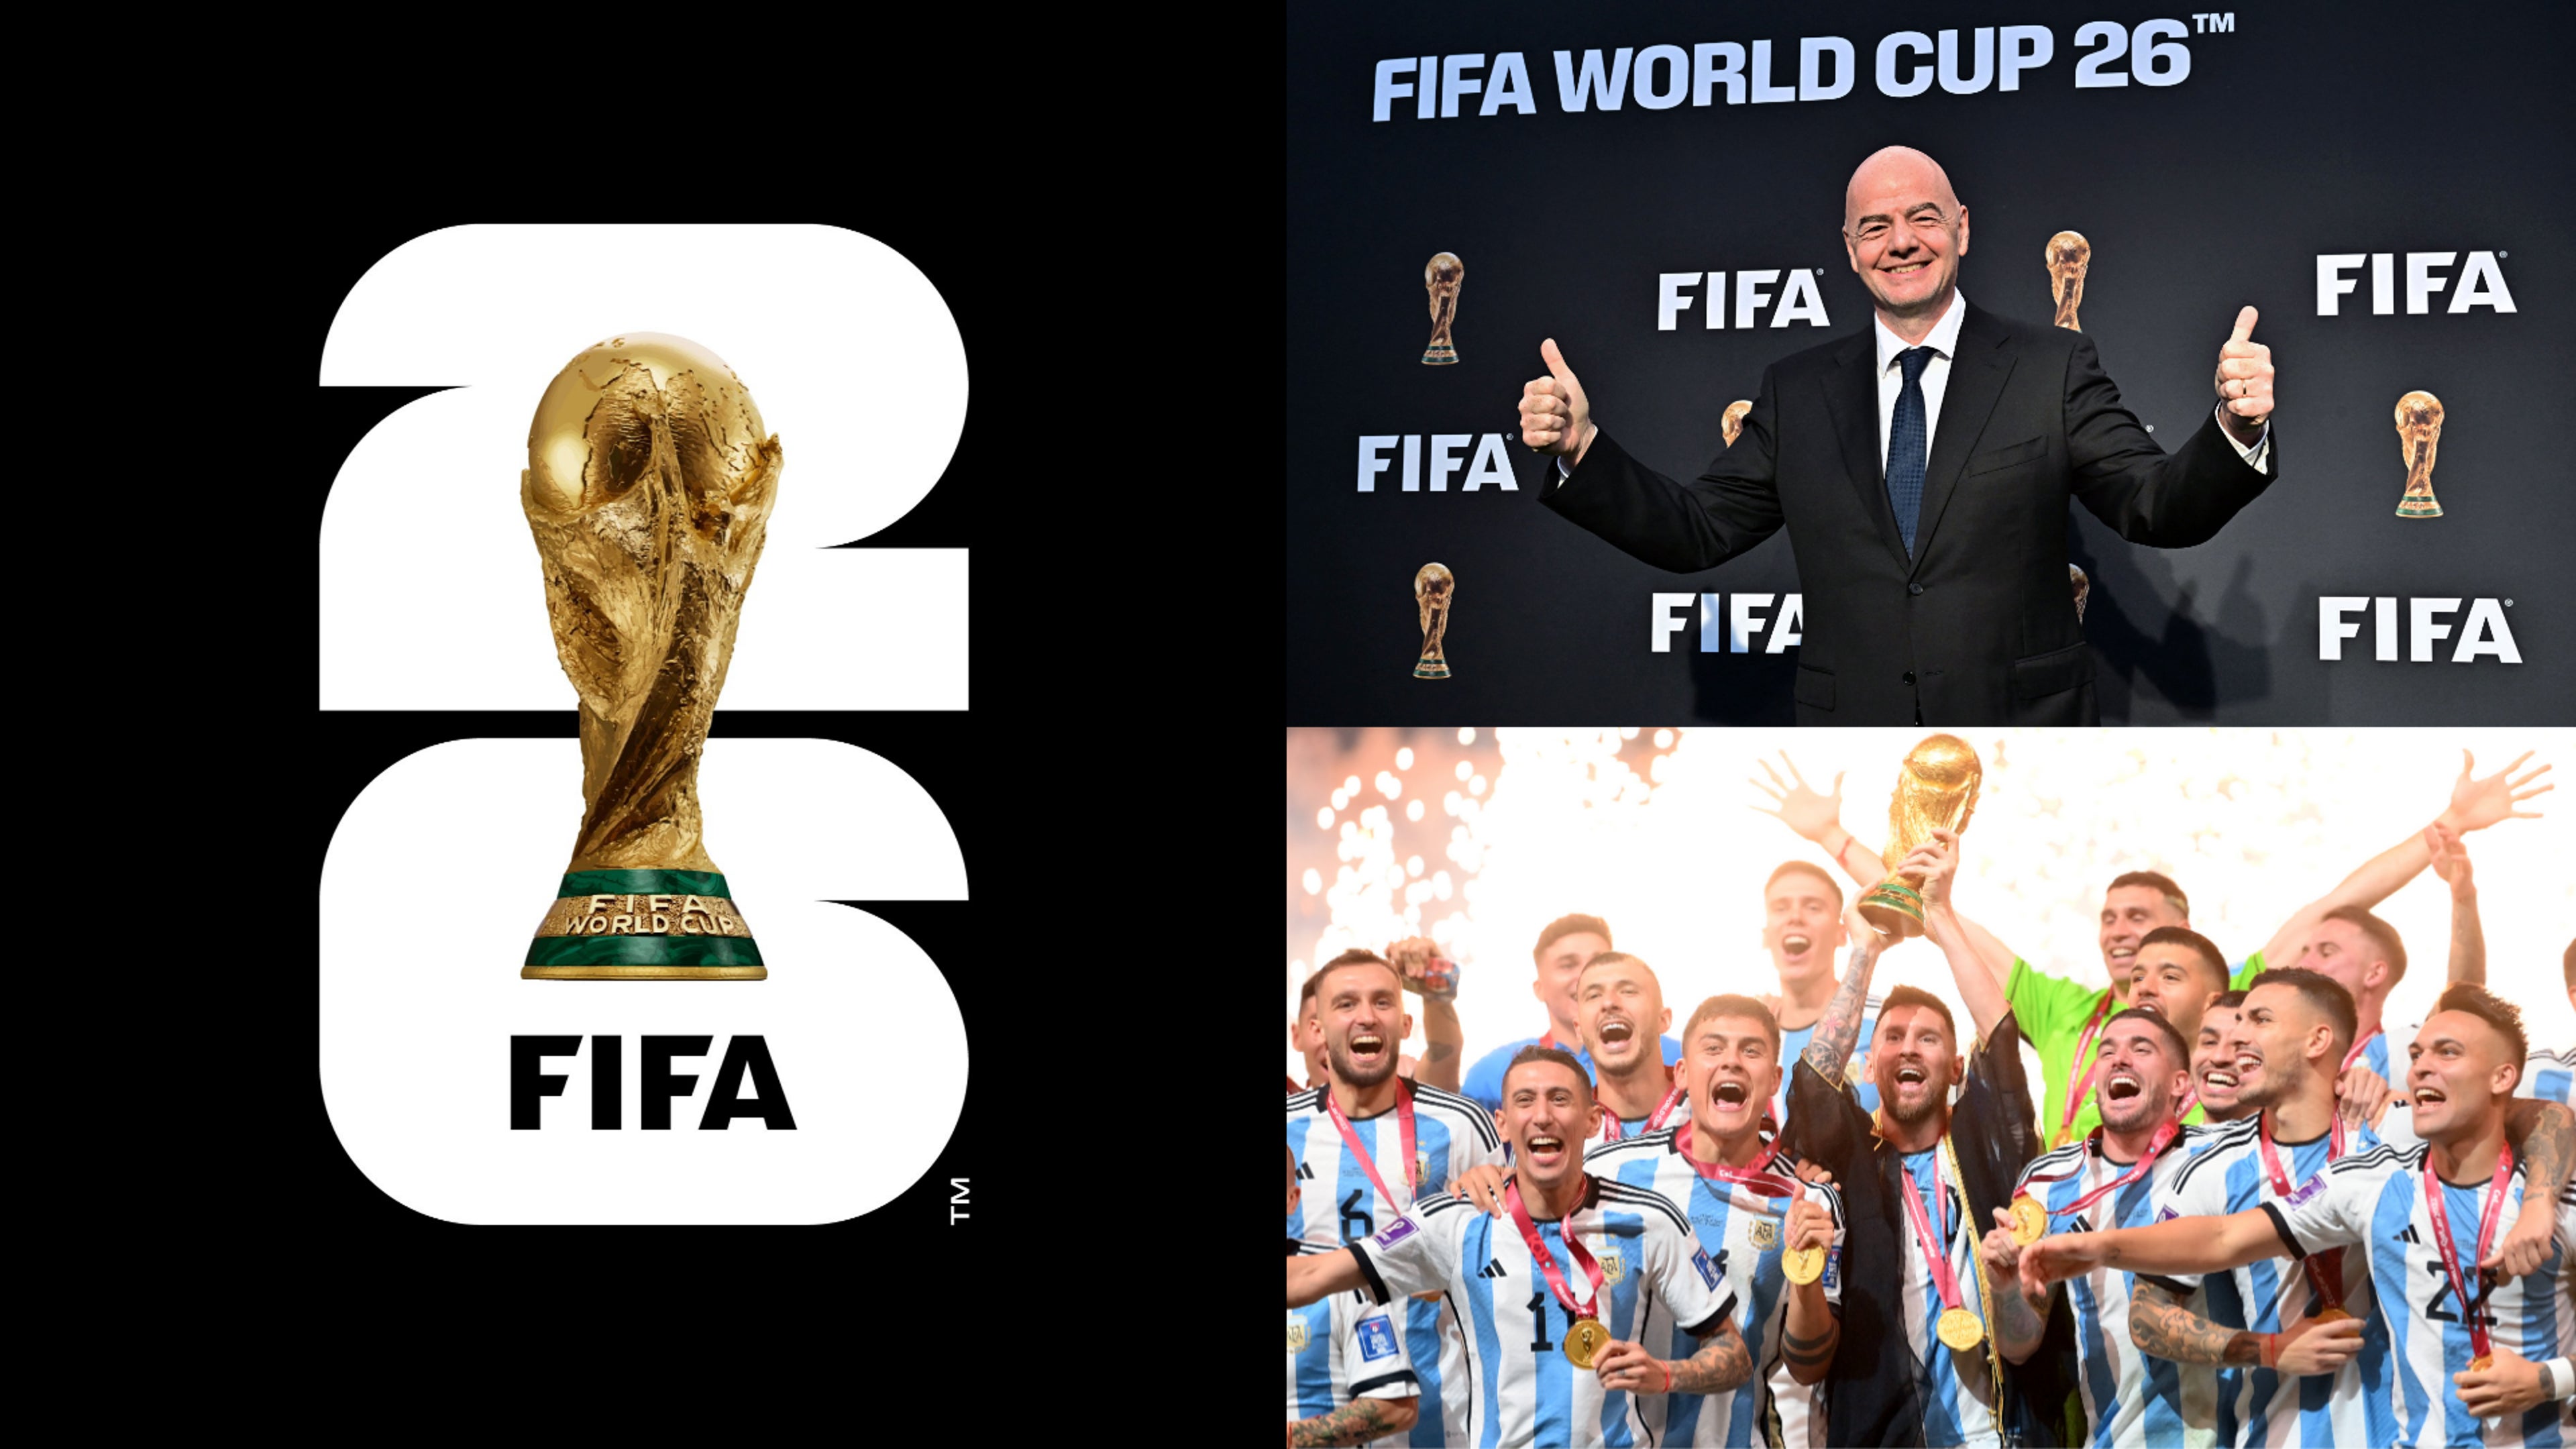  2026 World Cup Logo Branding Revealed By FIFA Ahead Of Tournament In 